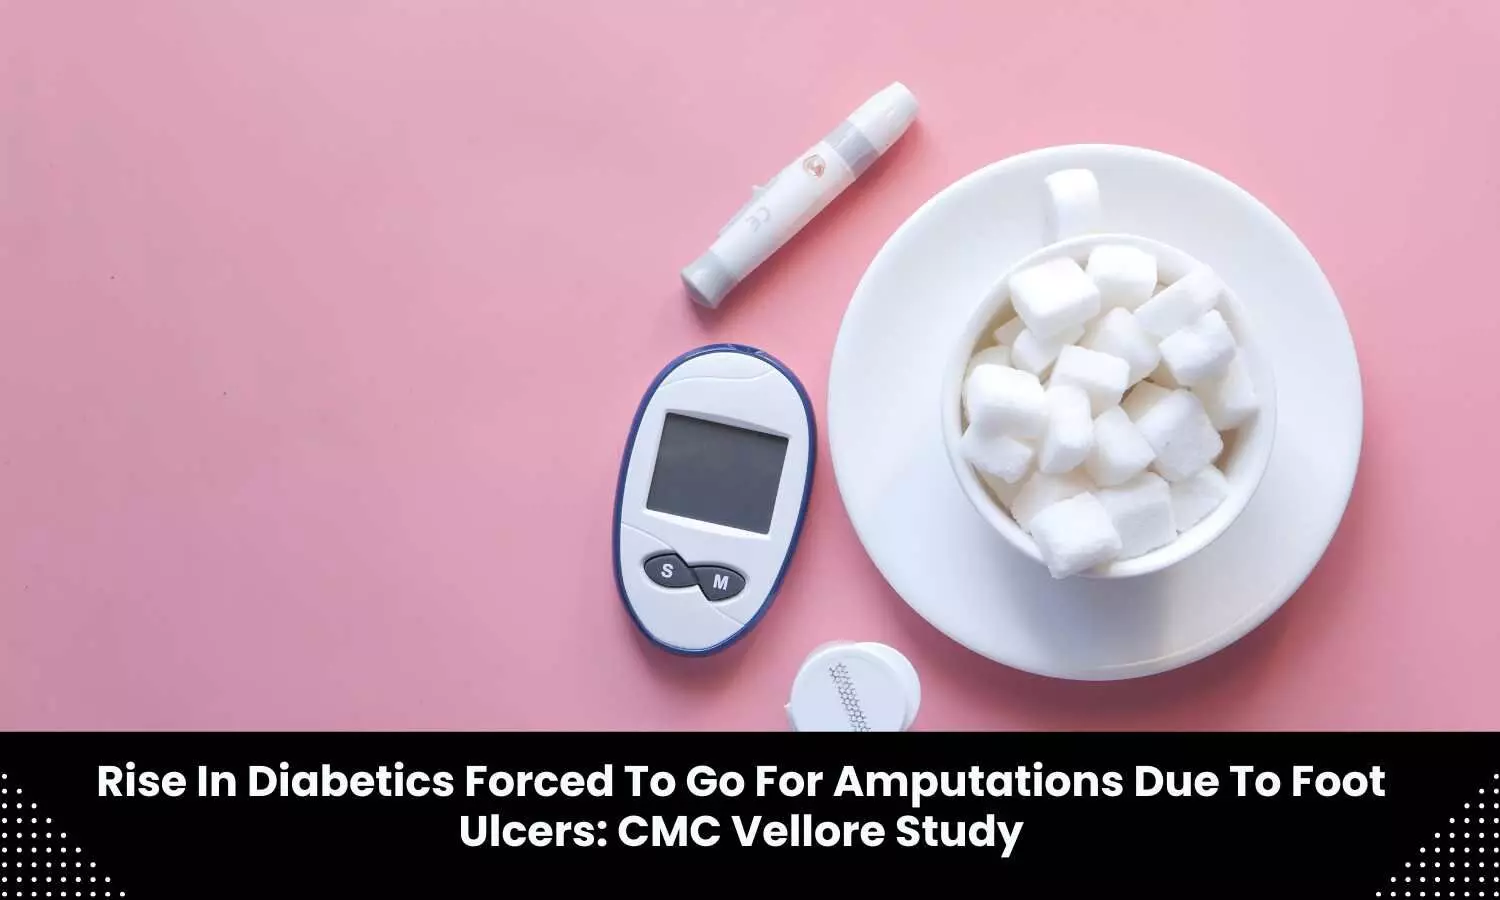 Rise in diabetics forced to go for amputations due to foot ulcers, finds study